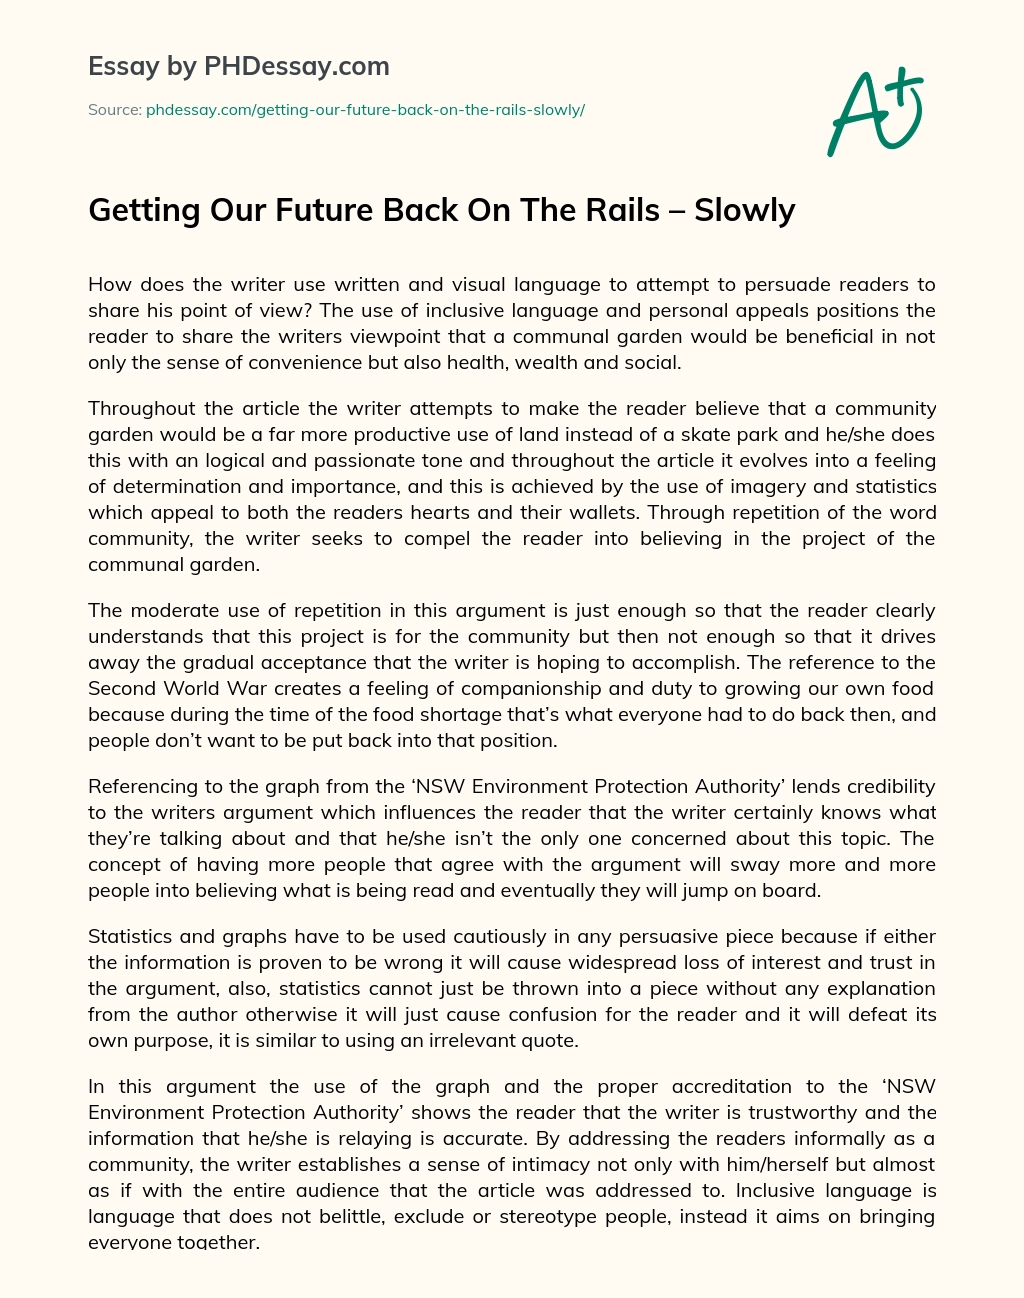 Getting Our Future Back On The Rails – Slowly essay